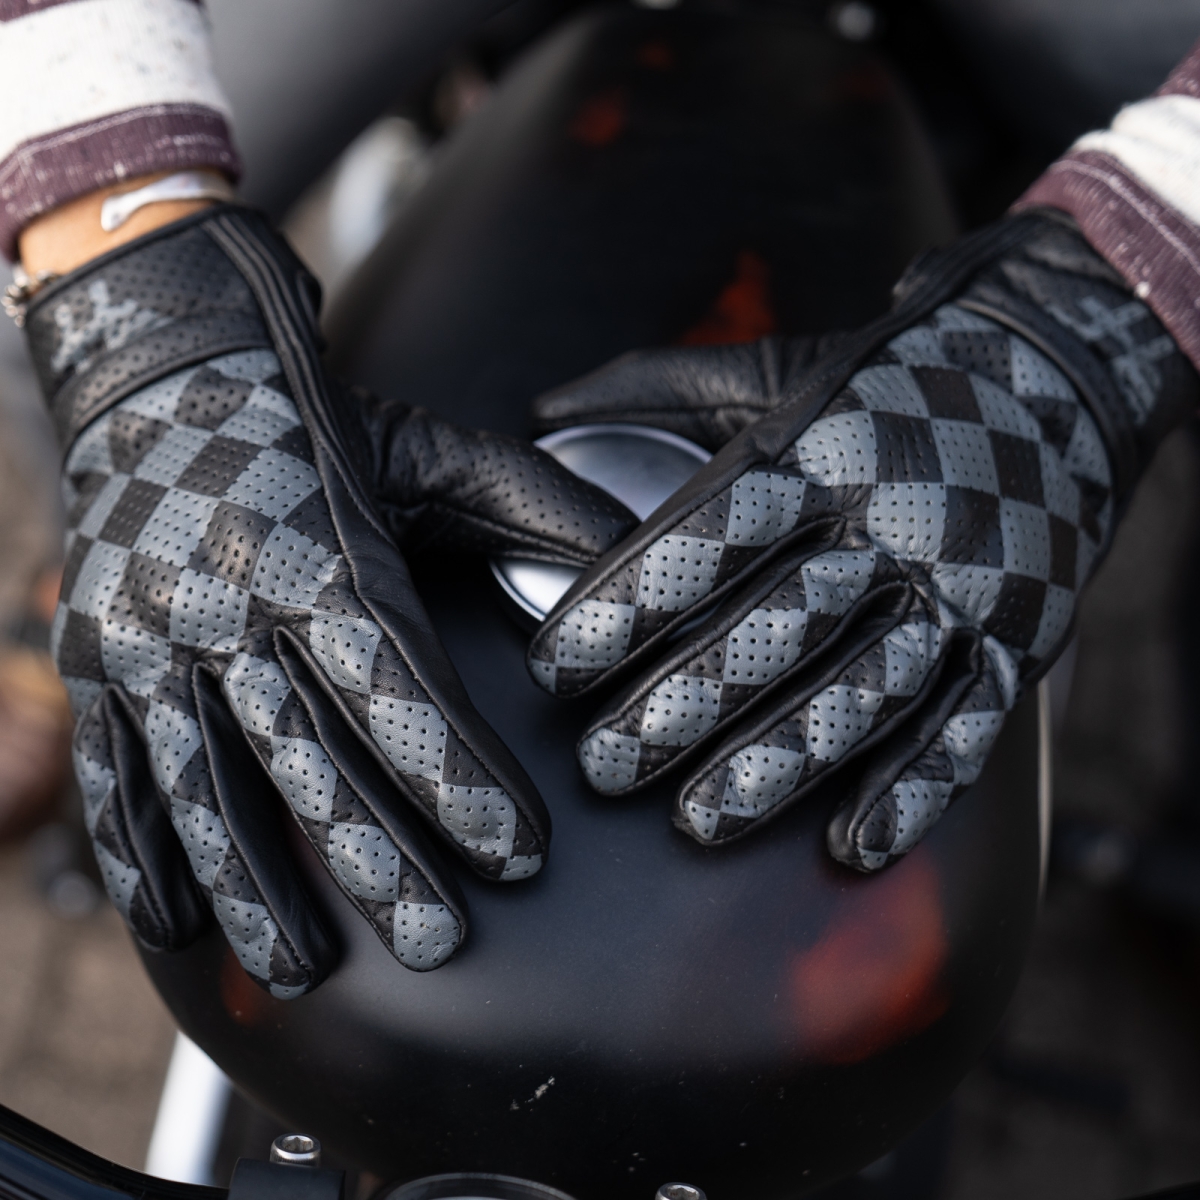 LEATHER CERTIFIED MOTORCYCLE GLOVE - BULLIT GREY 2021